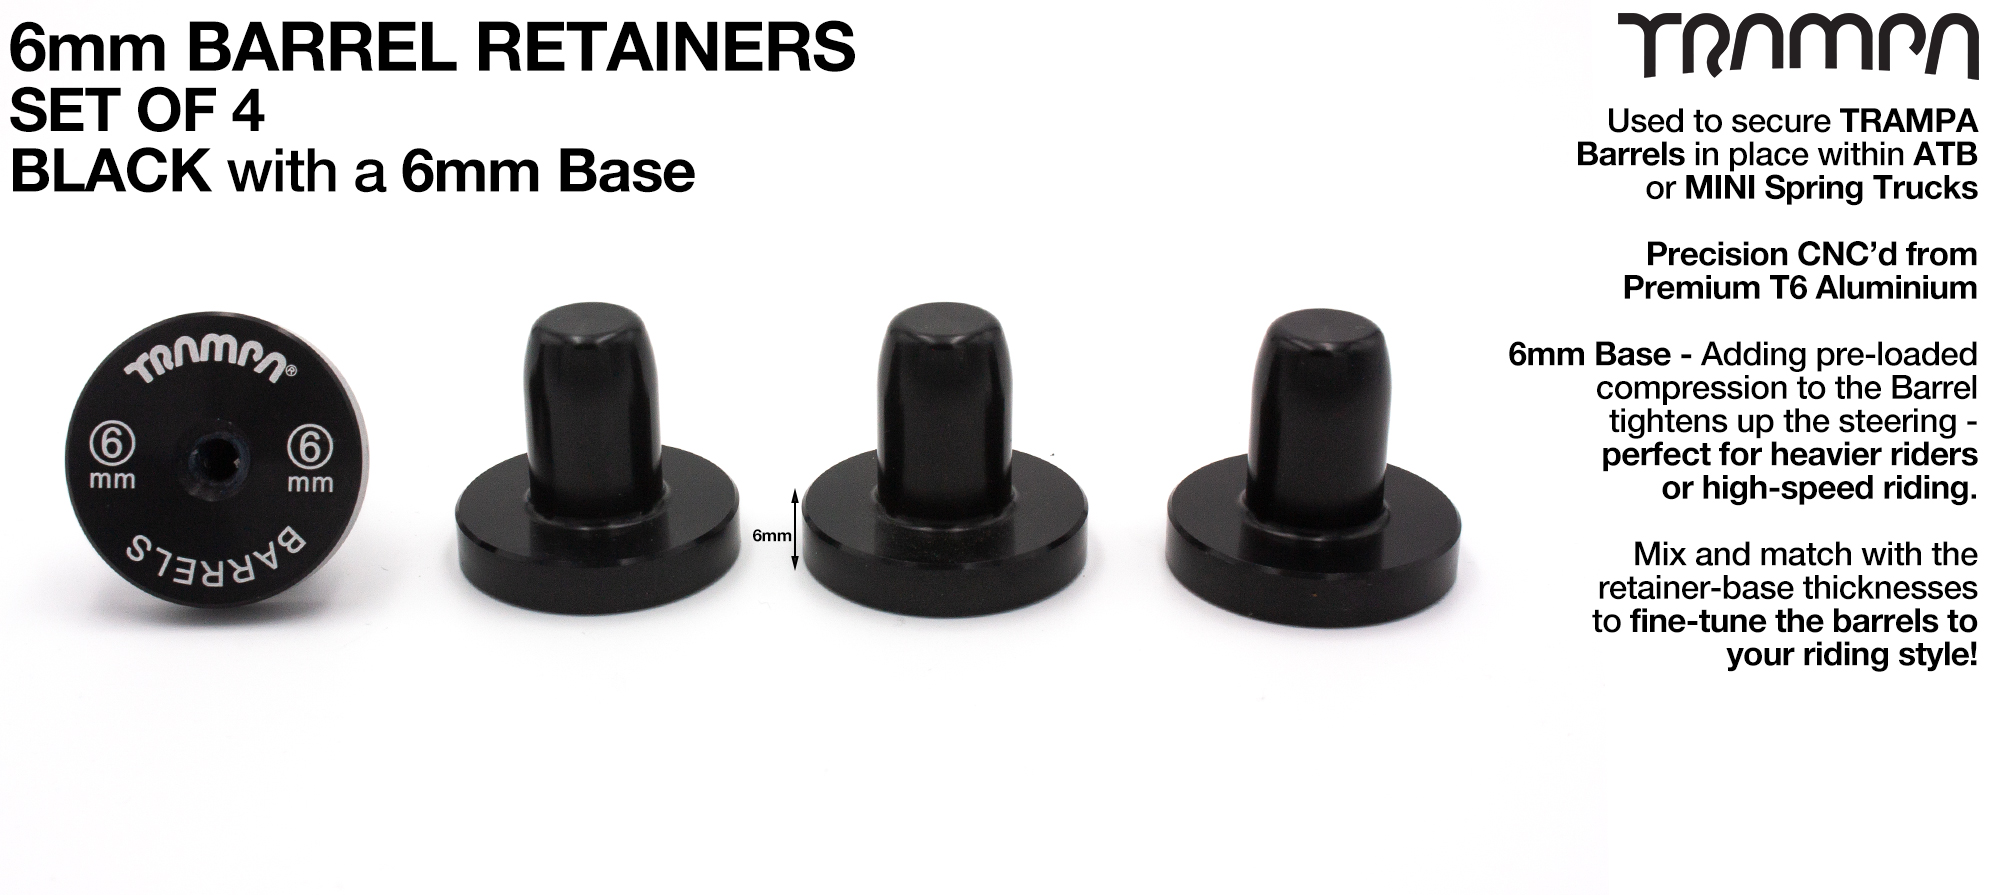 Barrel Retainers x4 with 6mm Base